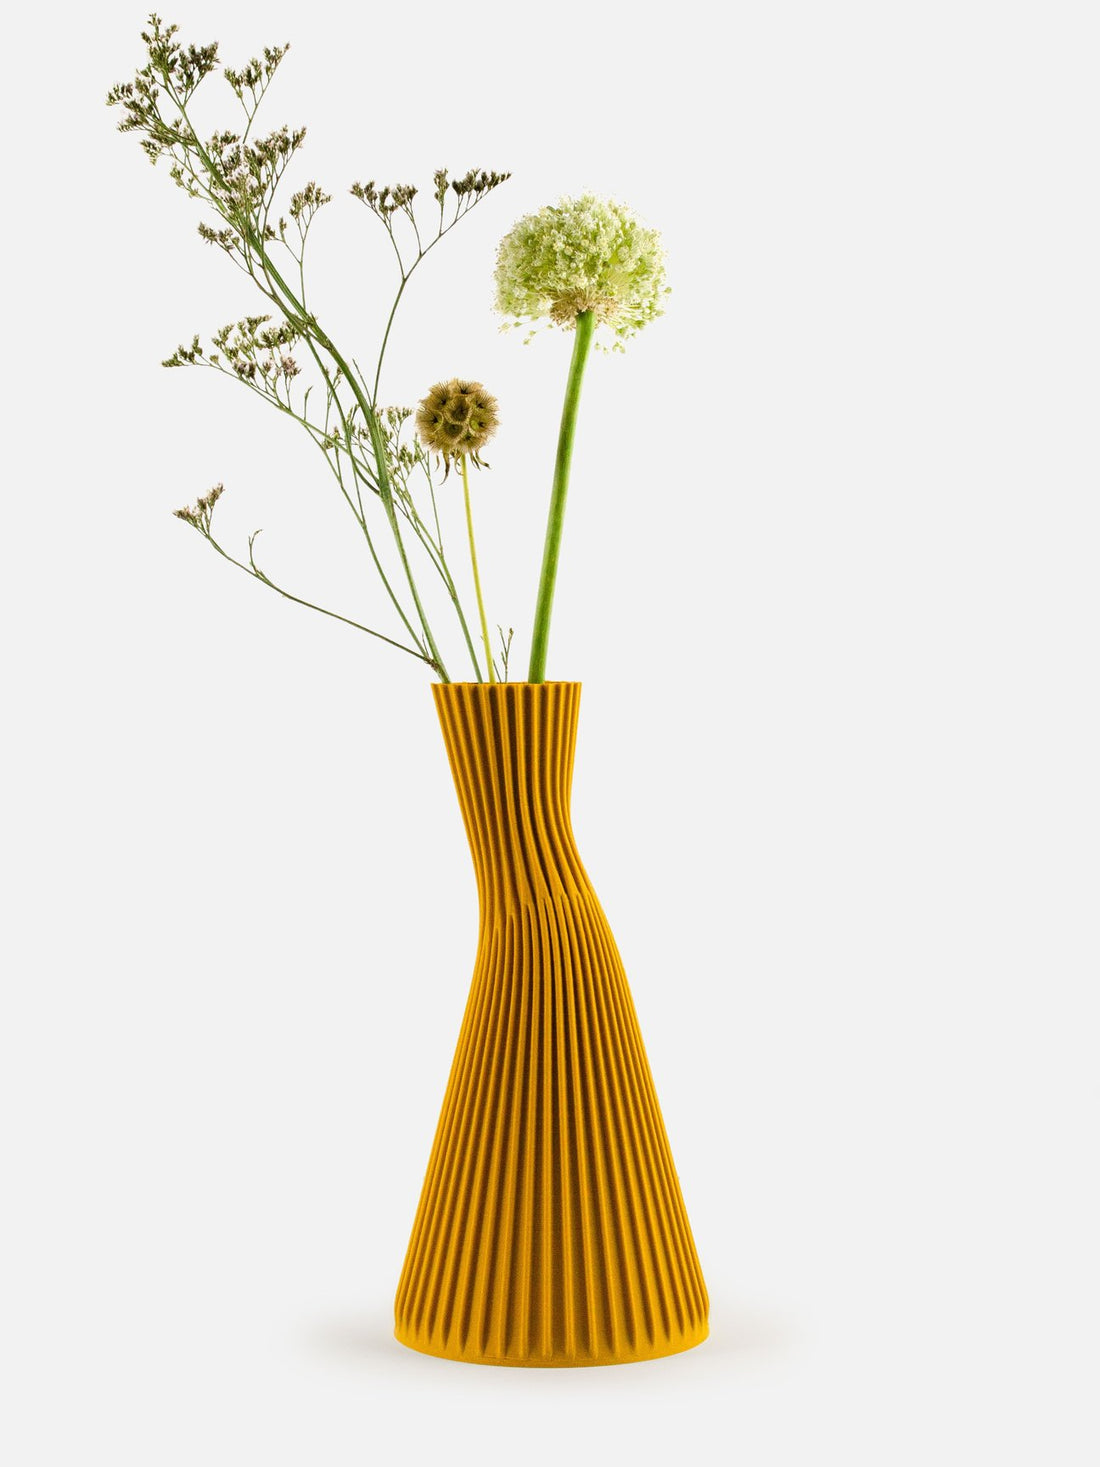 Wedding Vases: Creative Expression and Resilience with the IARC Collection